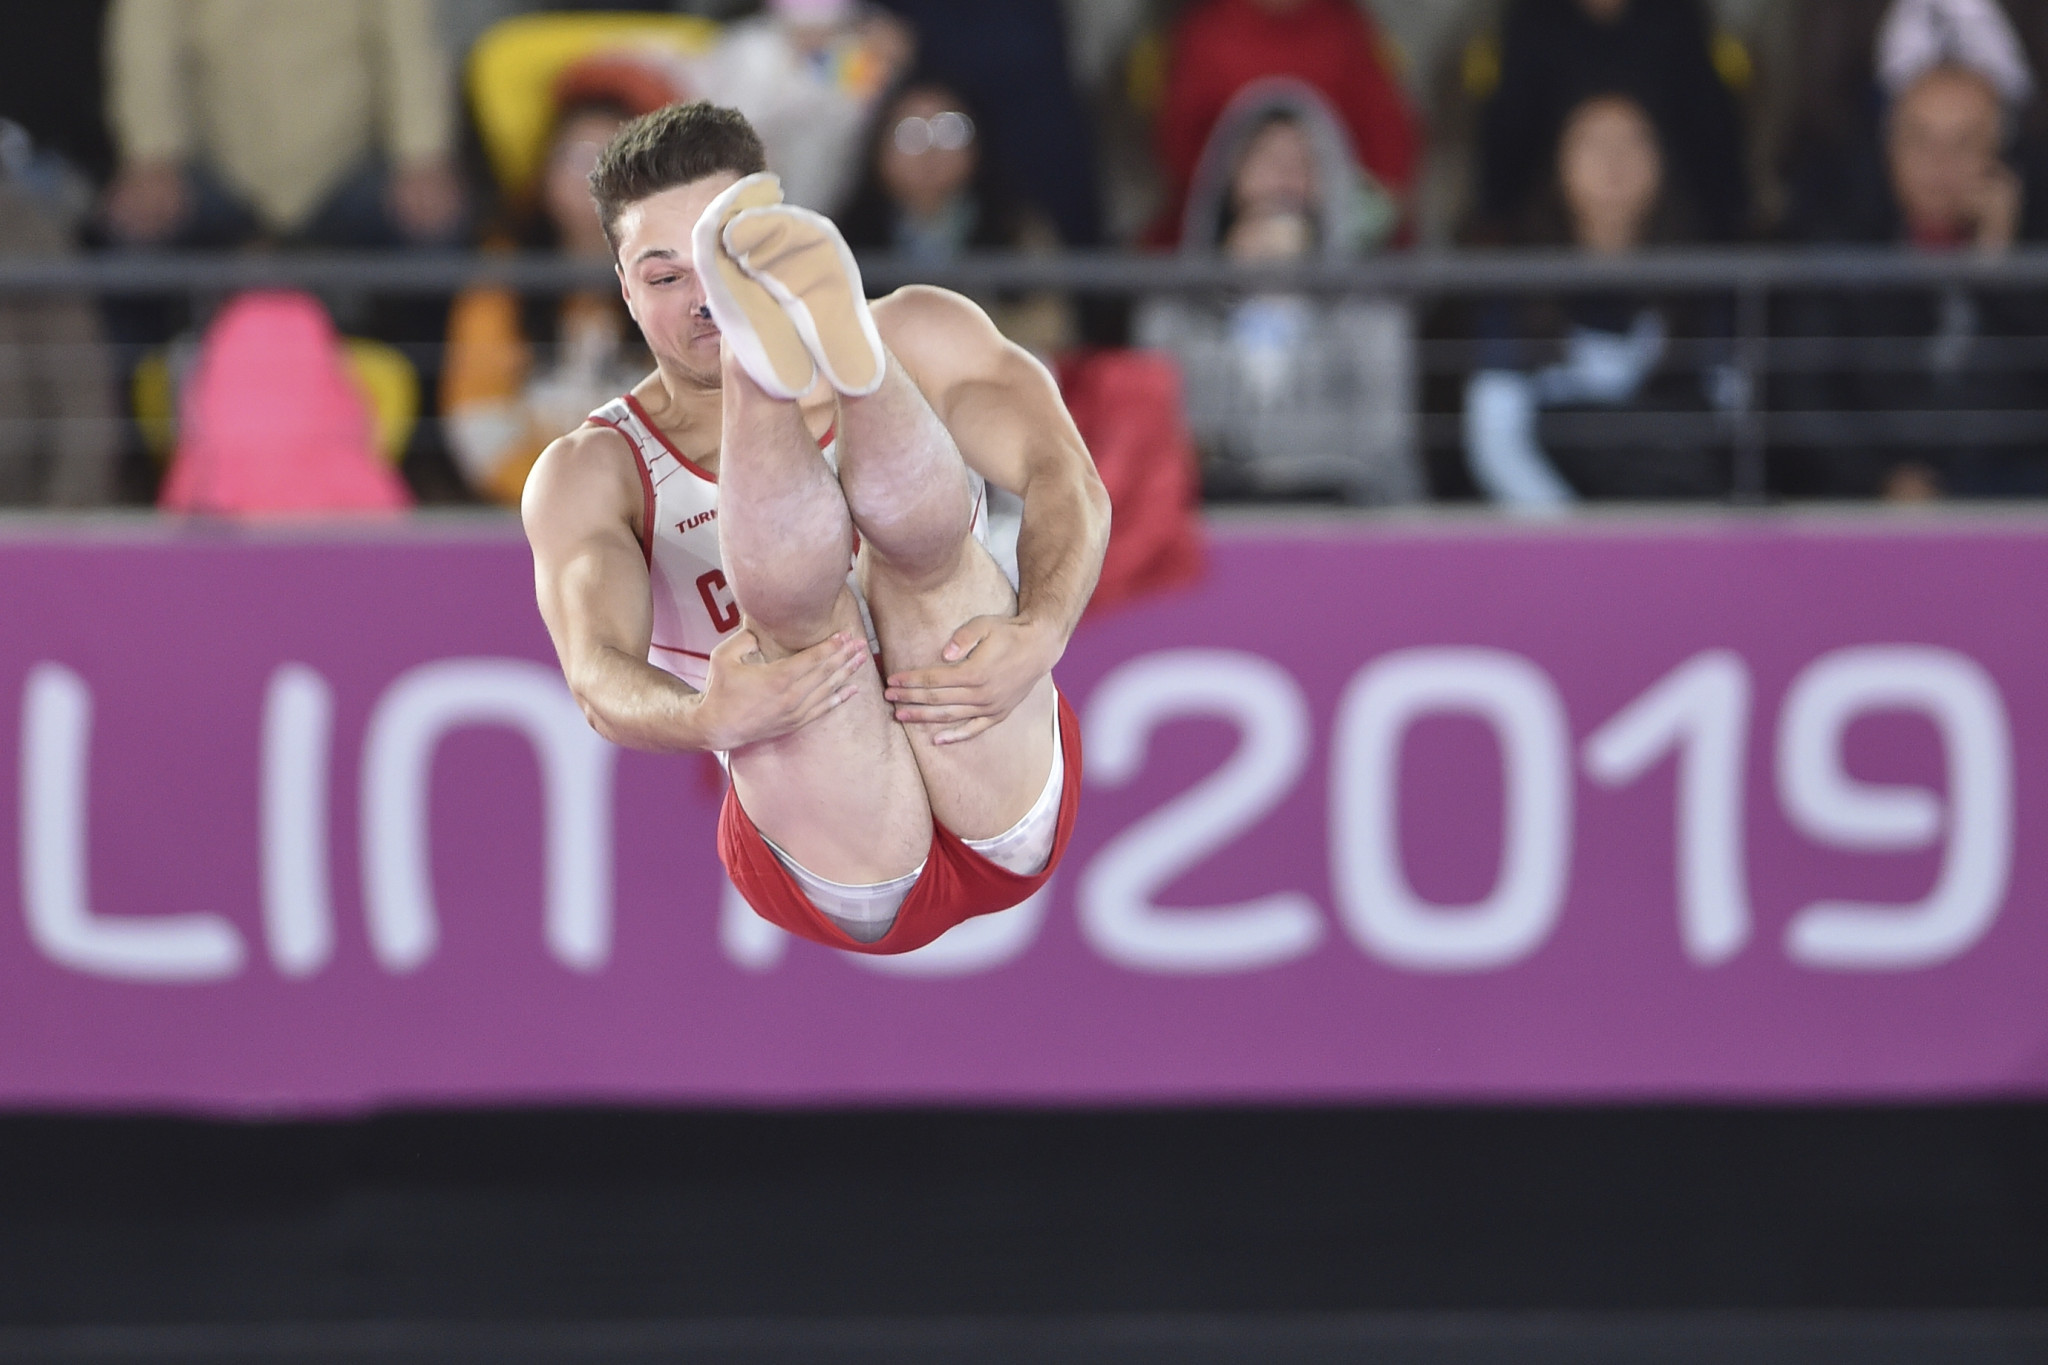 Jeremy Chartier was the victor in the men's individual trampoline competition ©Lima 2019